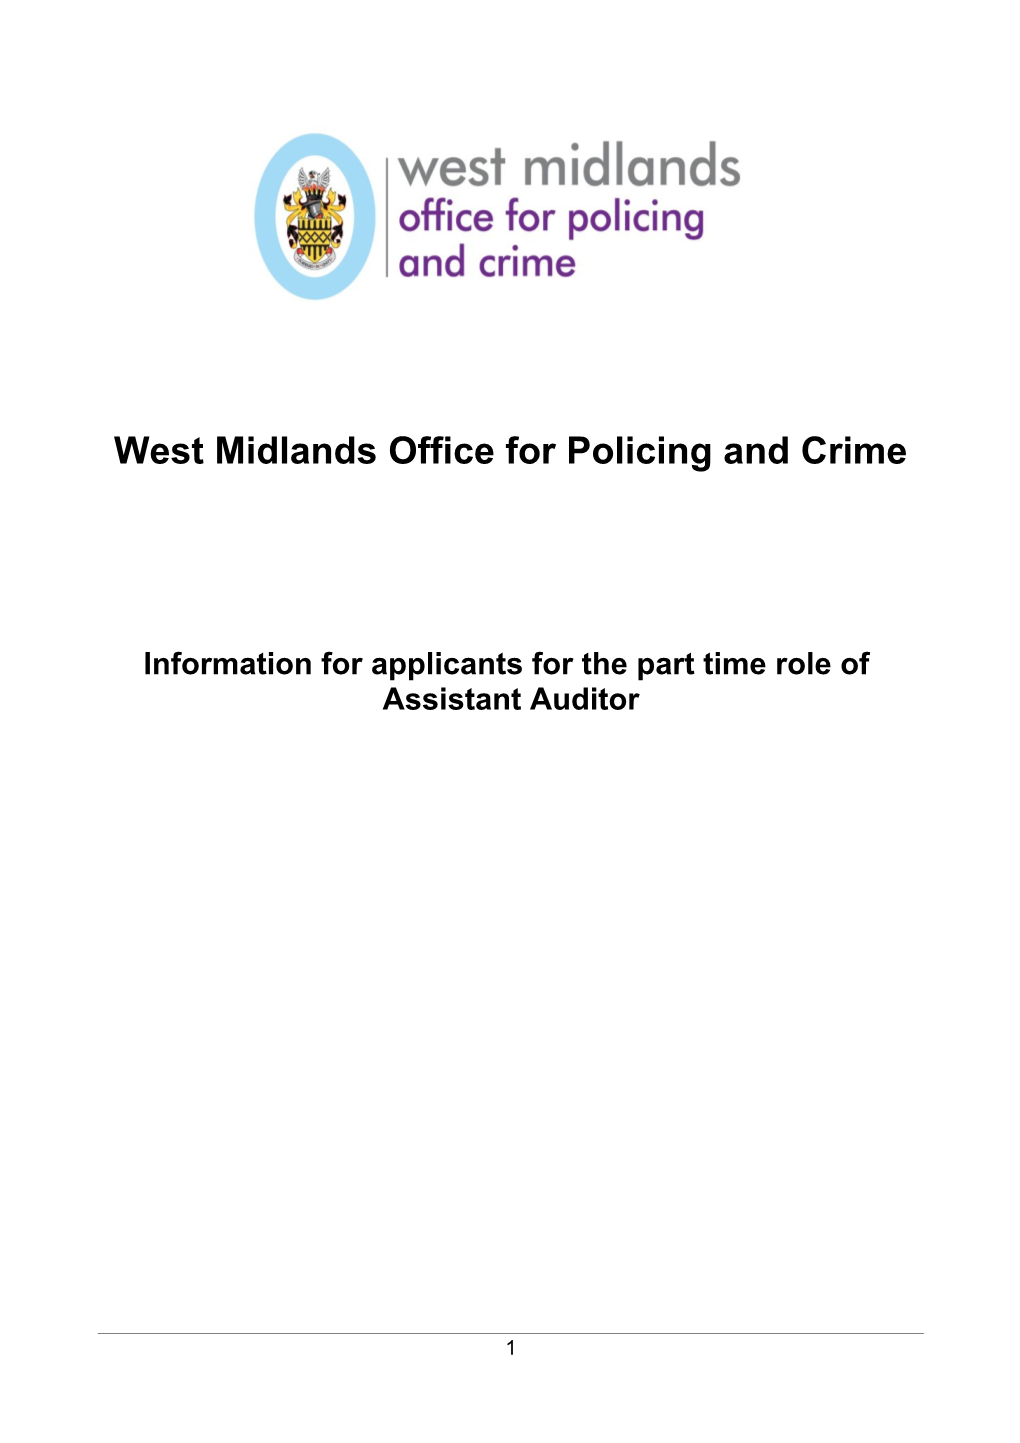 West Midlands Office for Policing and Crime